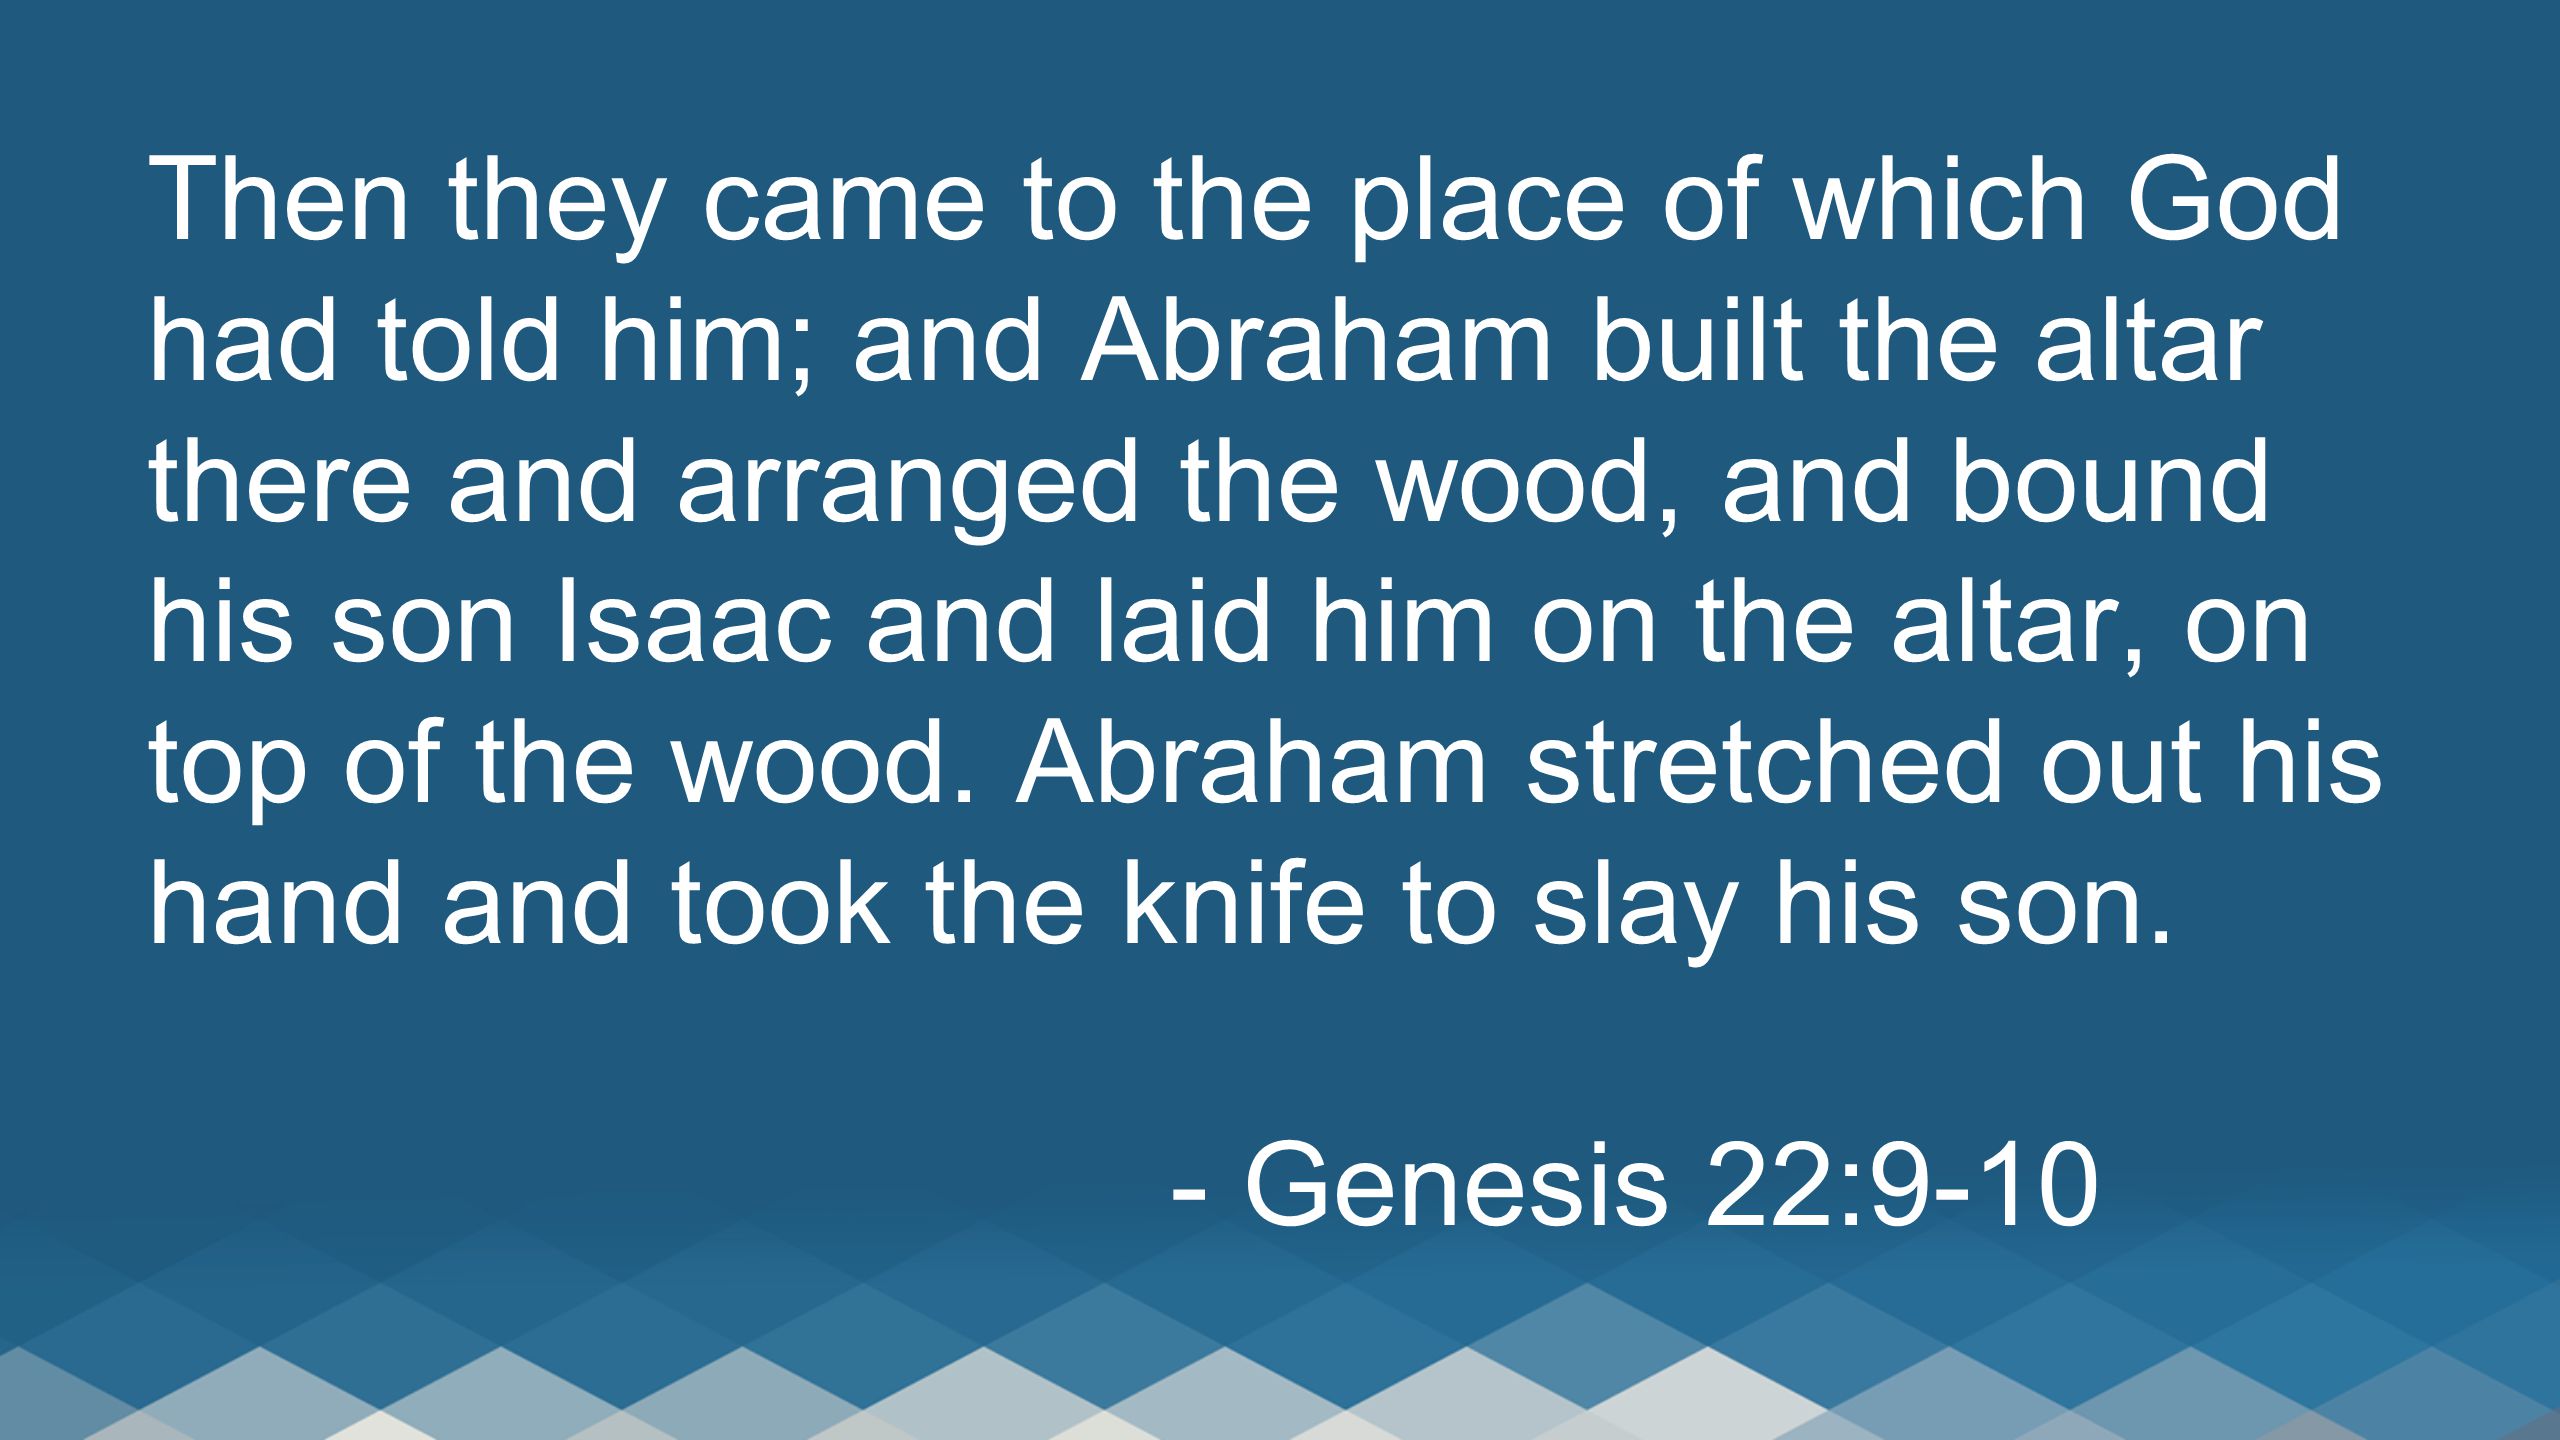 Then they came to the place of which God had told him; and Abraham built the altar there and arranged the wood, and bound his son Isaac and laid him on the altar, on top of the wood.